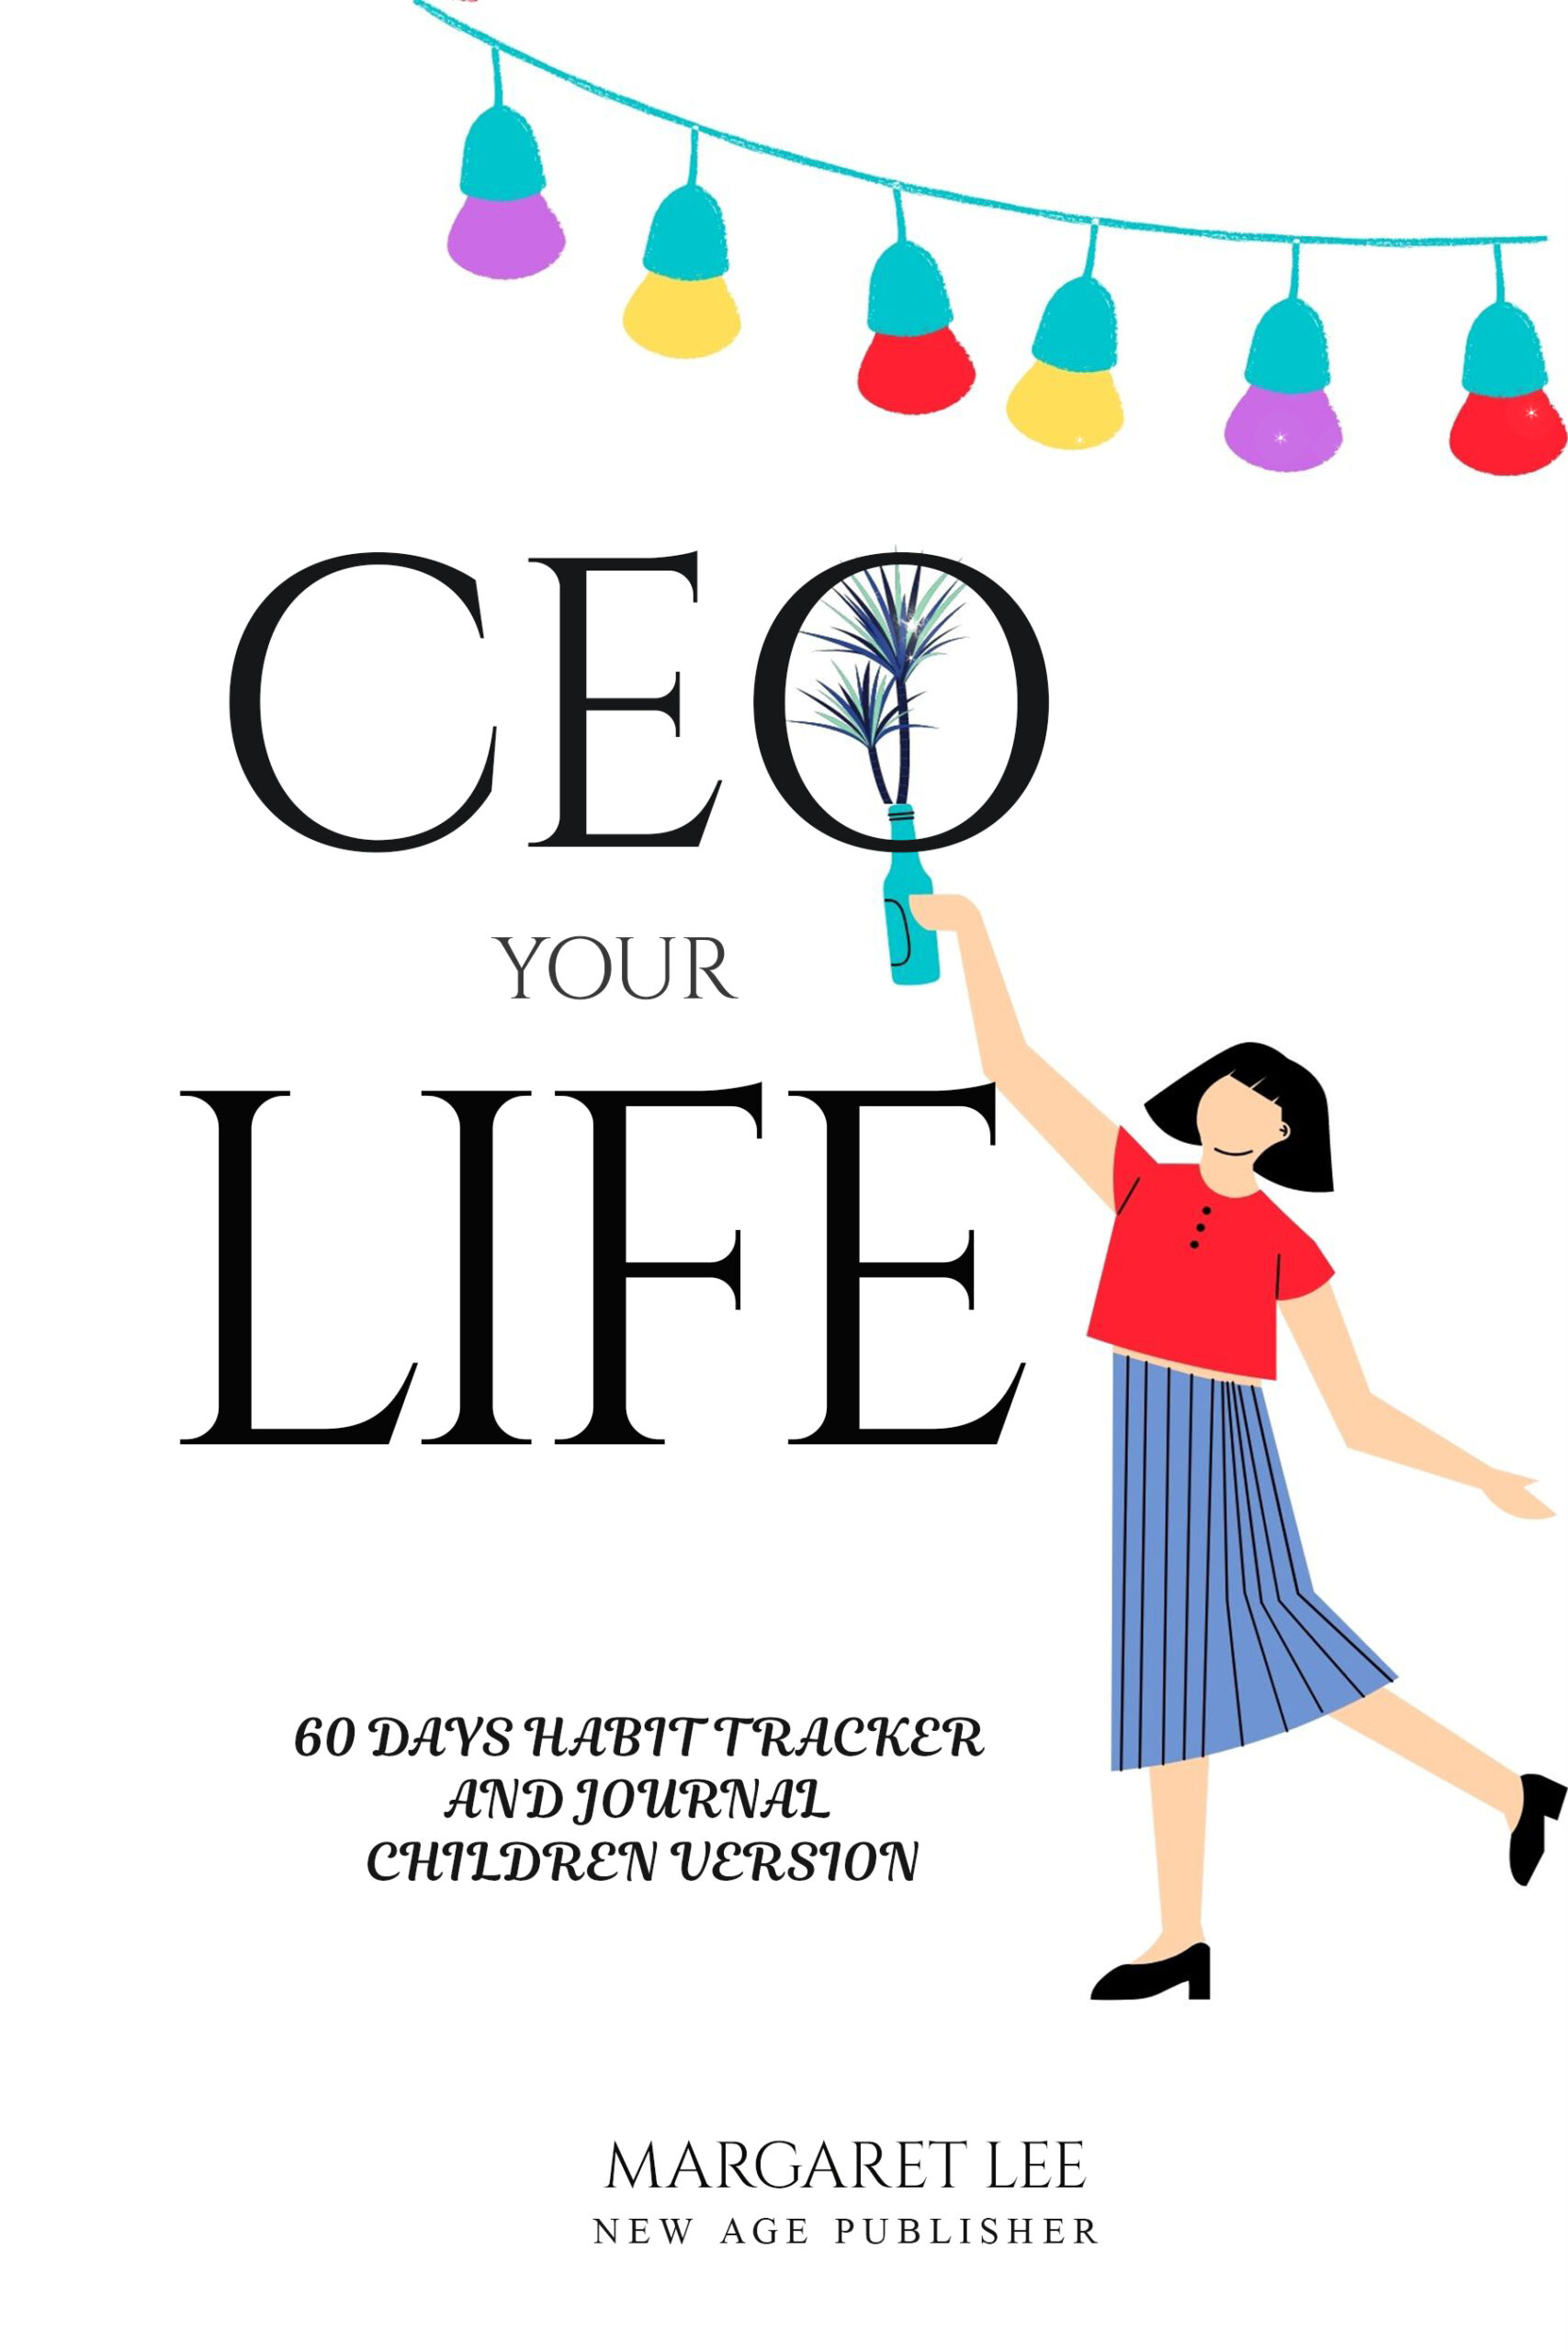 FREE: CEO your life with 7 habits of happy kids book ages 6-12 by Margaret Lee